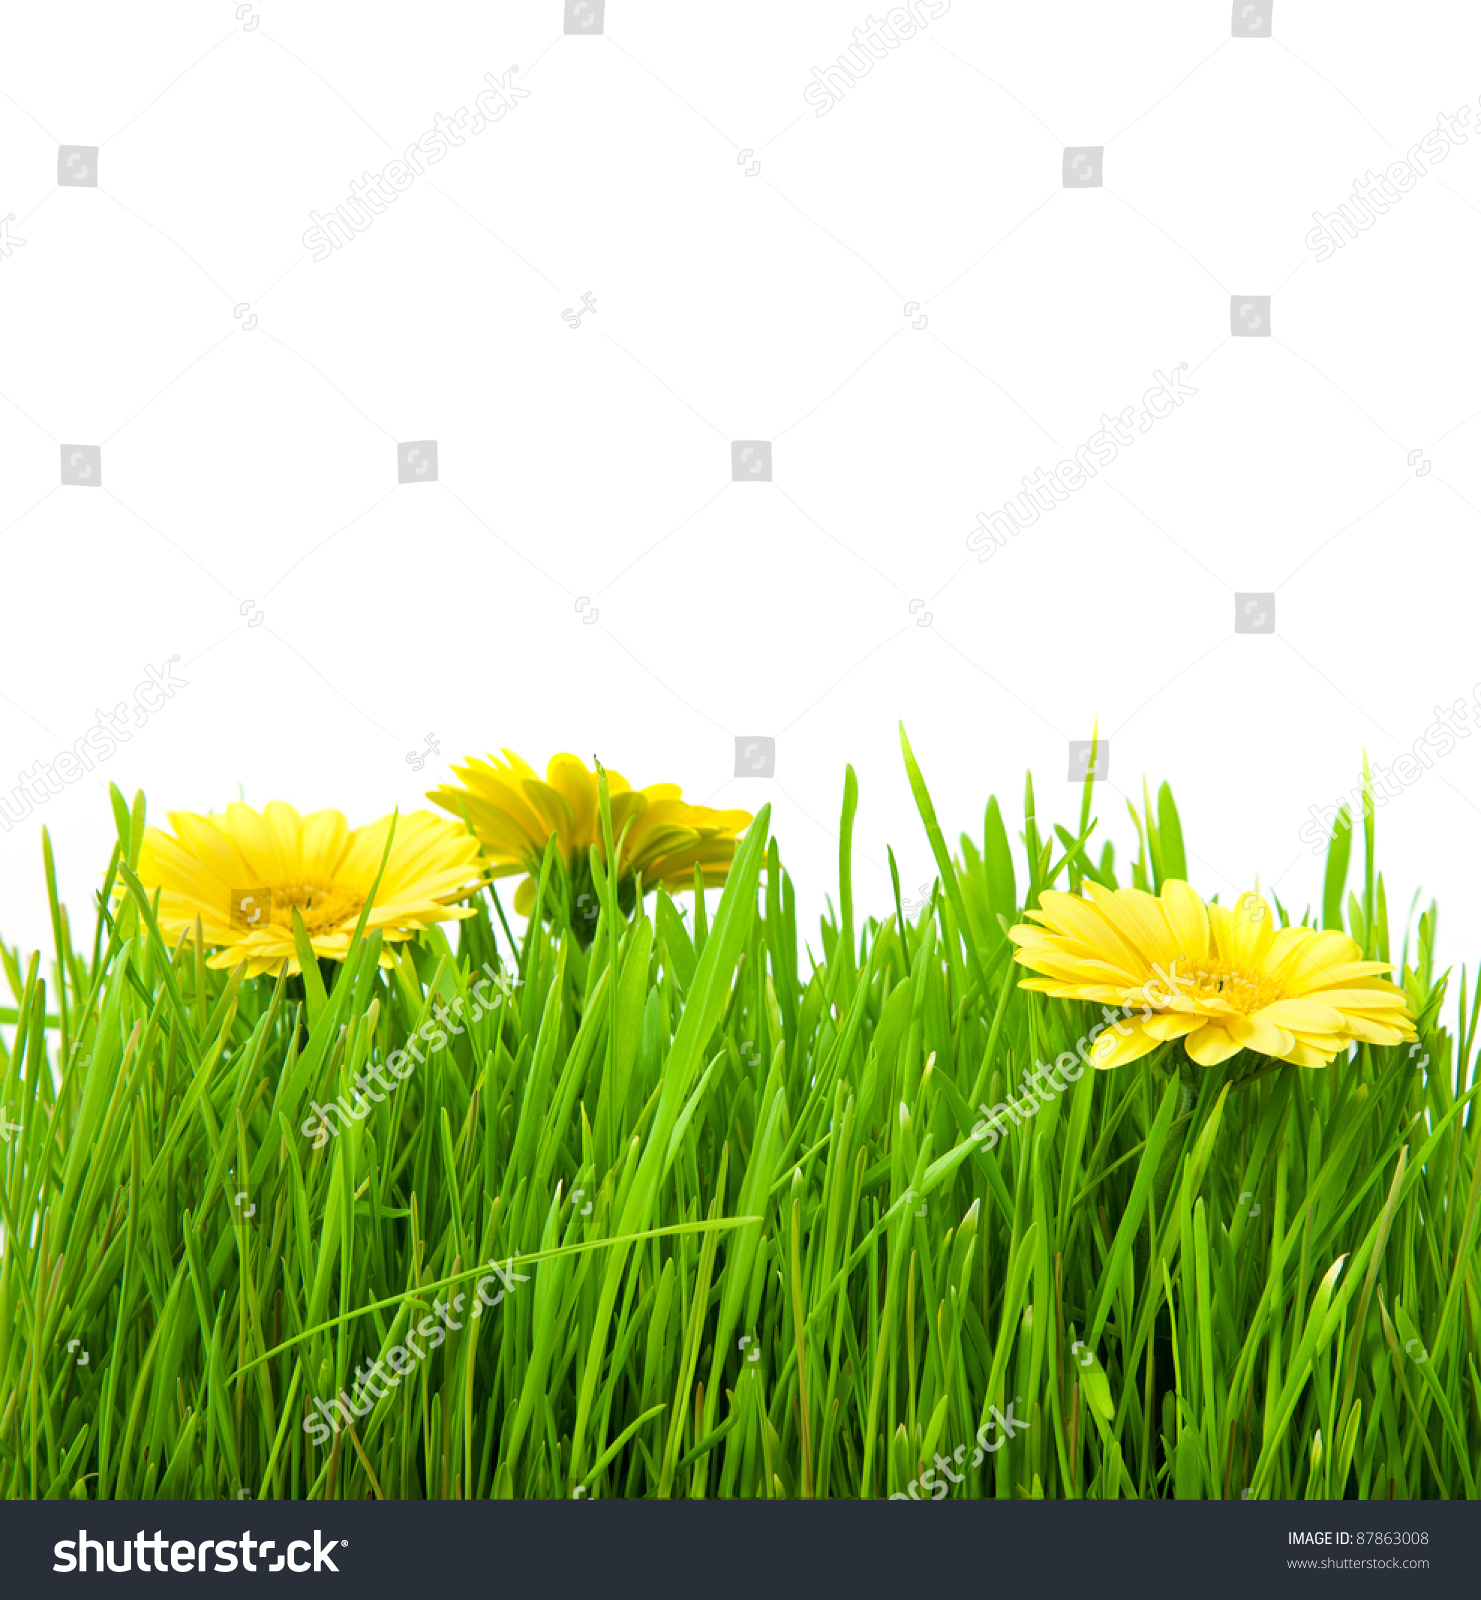 Isolated Green Grass Yellow Flowers On Stock Photo 87863008 ...